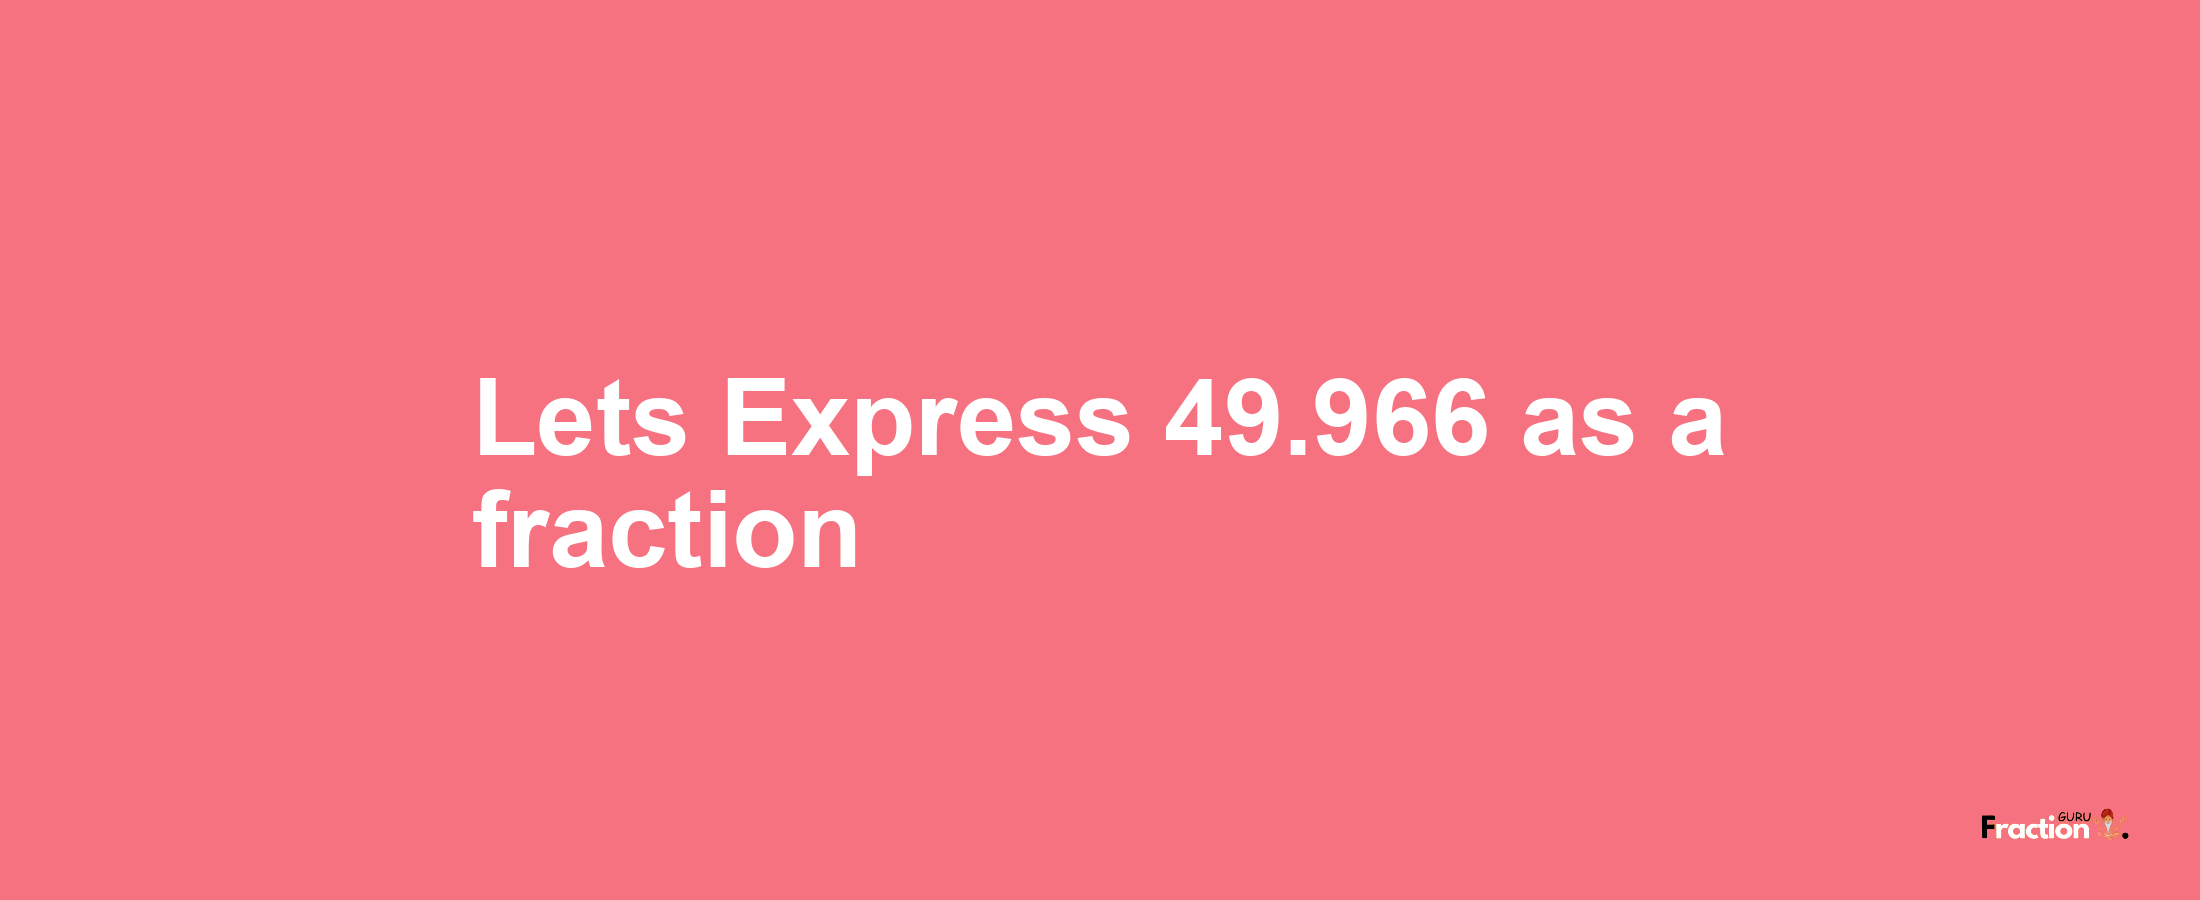 Lets Express 49.966 as afraction